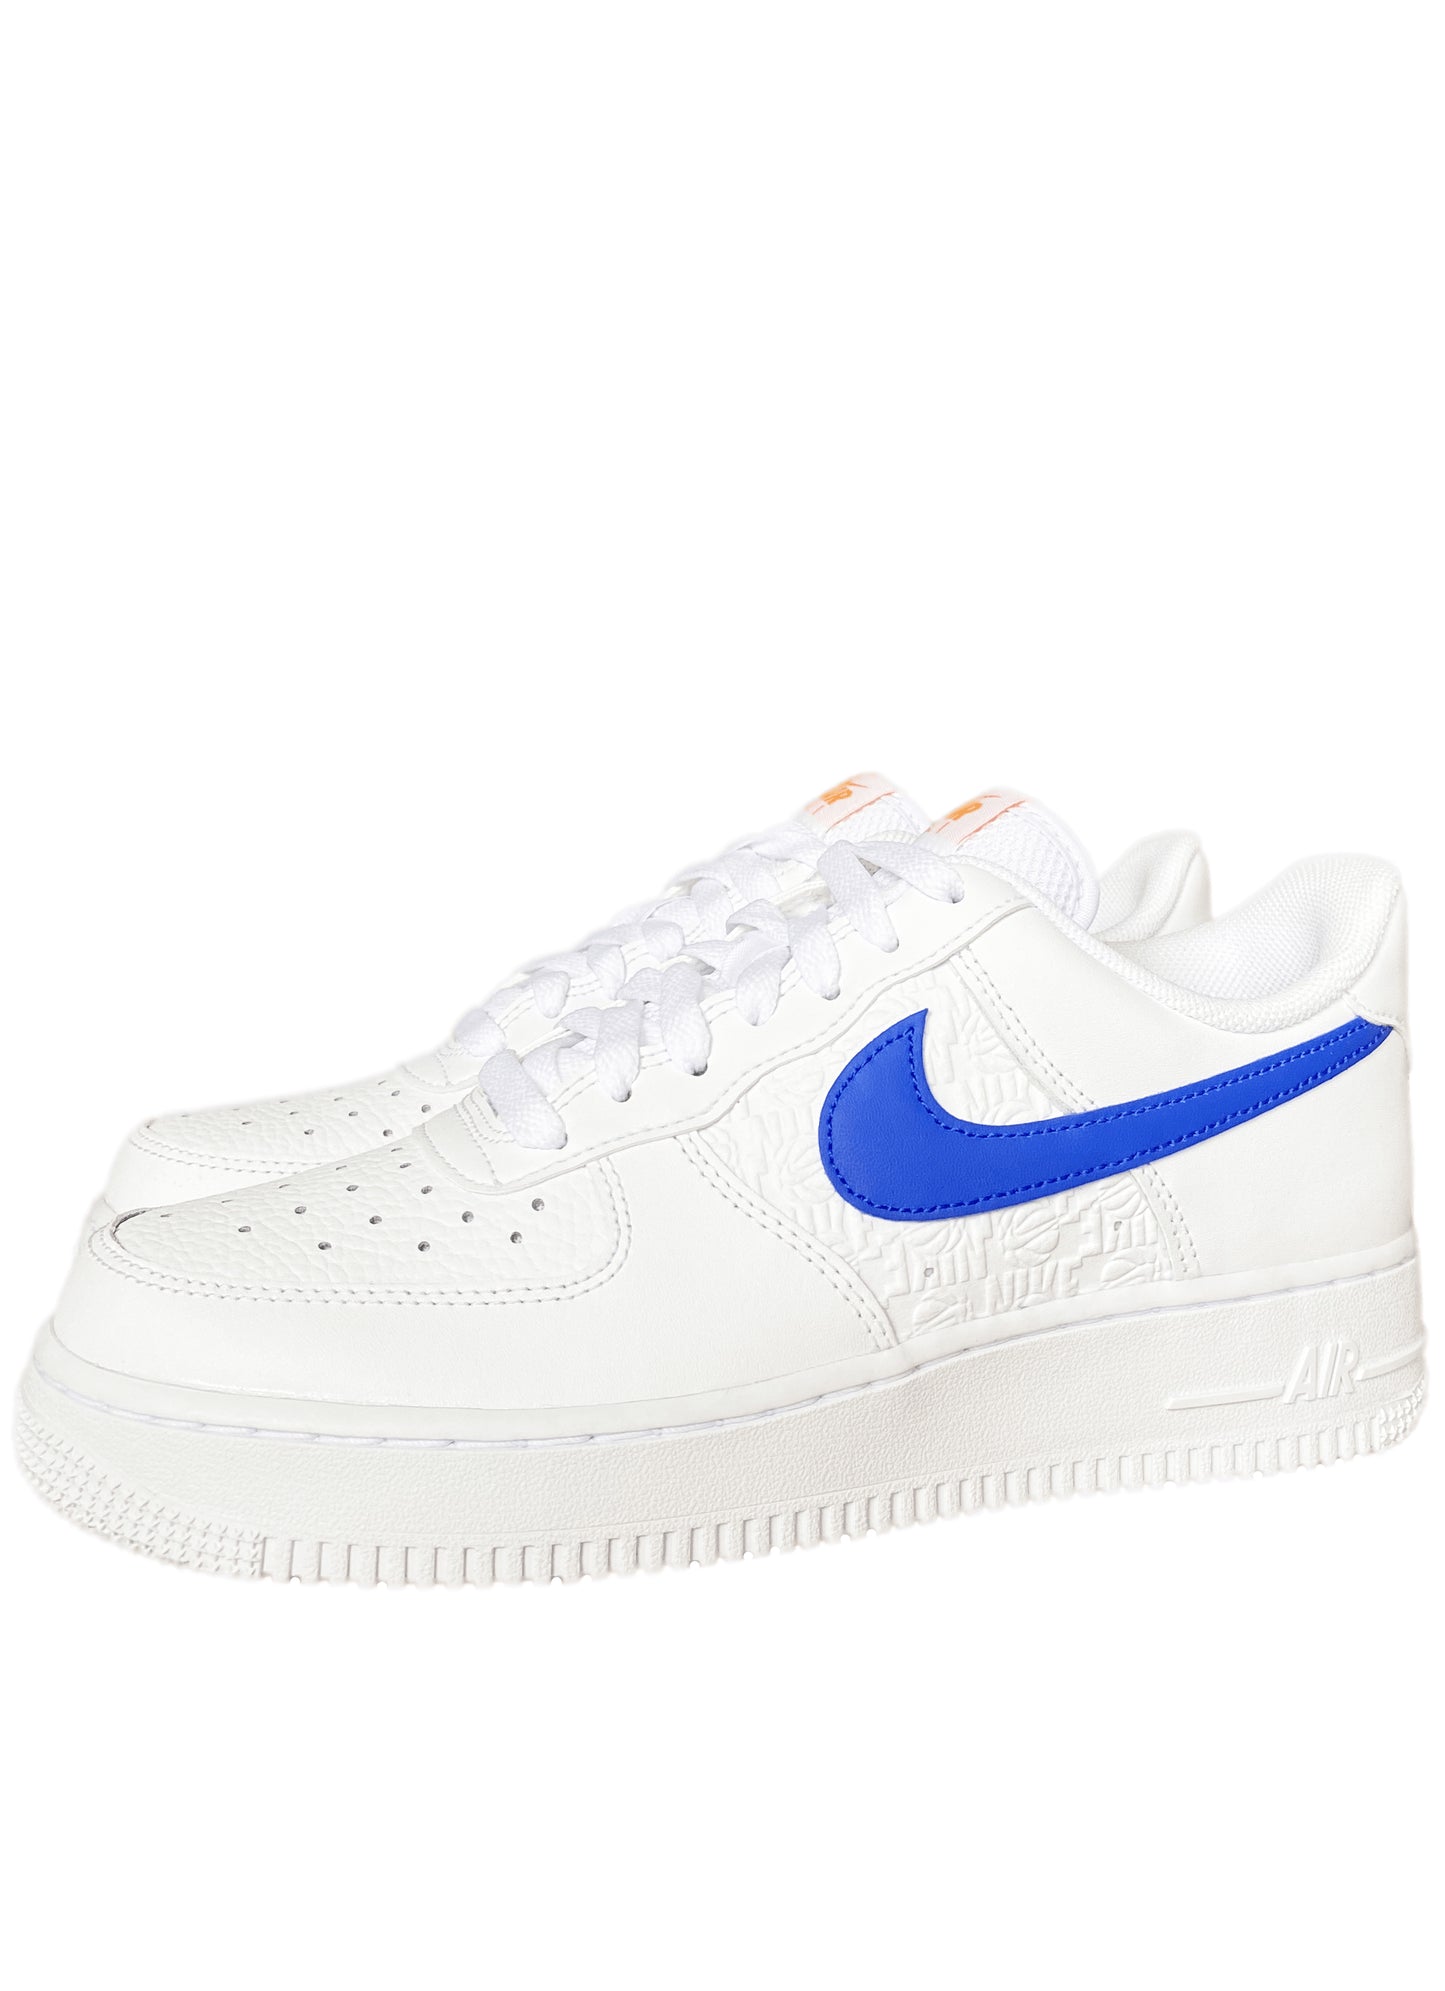 NIKE AIR FORCE 1 07 LOW " WHITE/RACER BLUE "